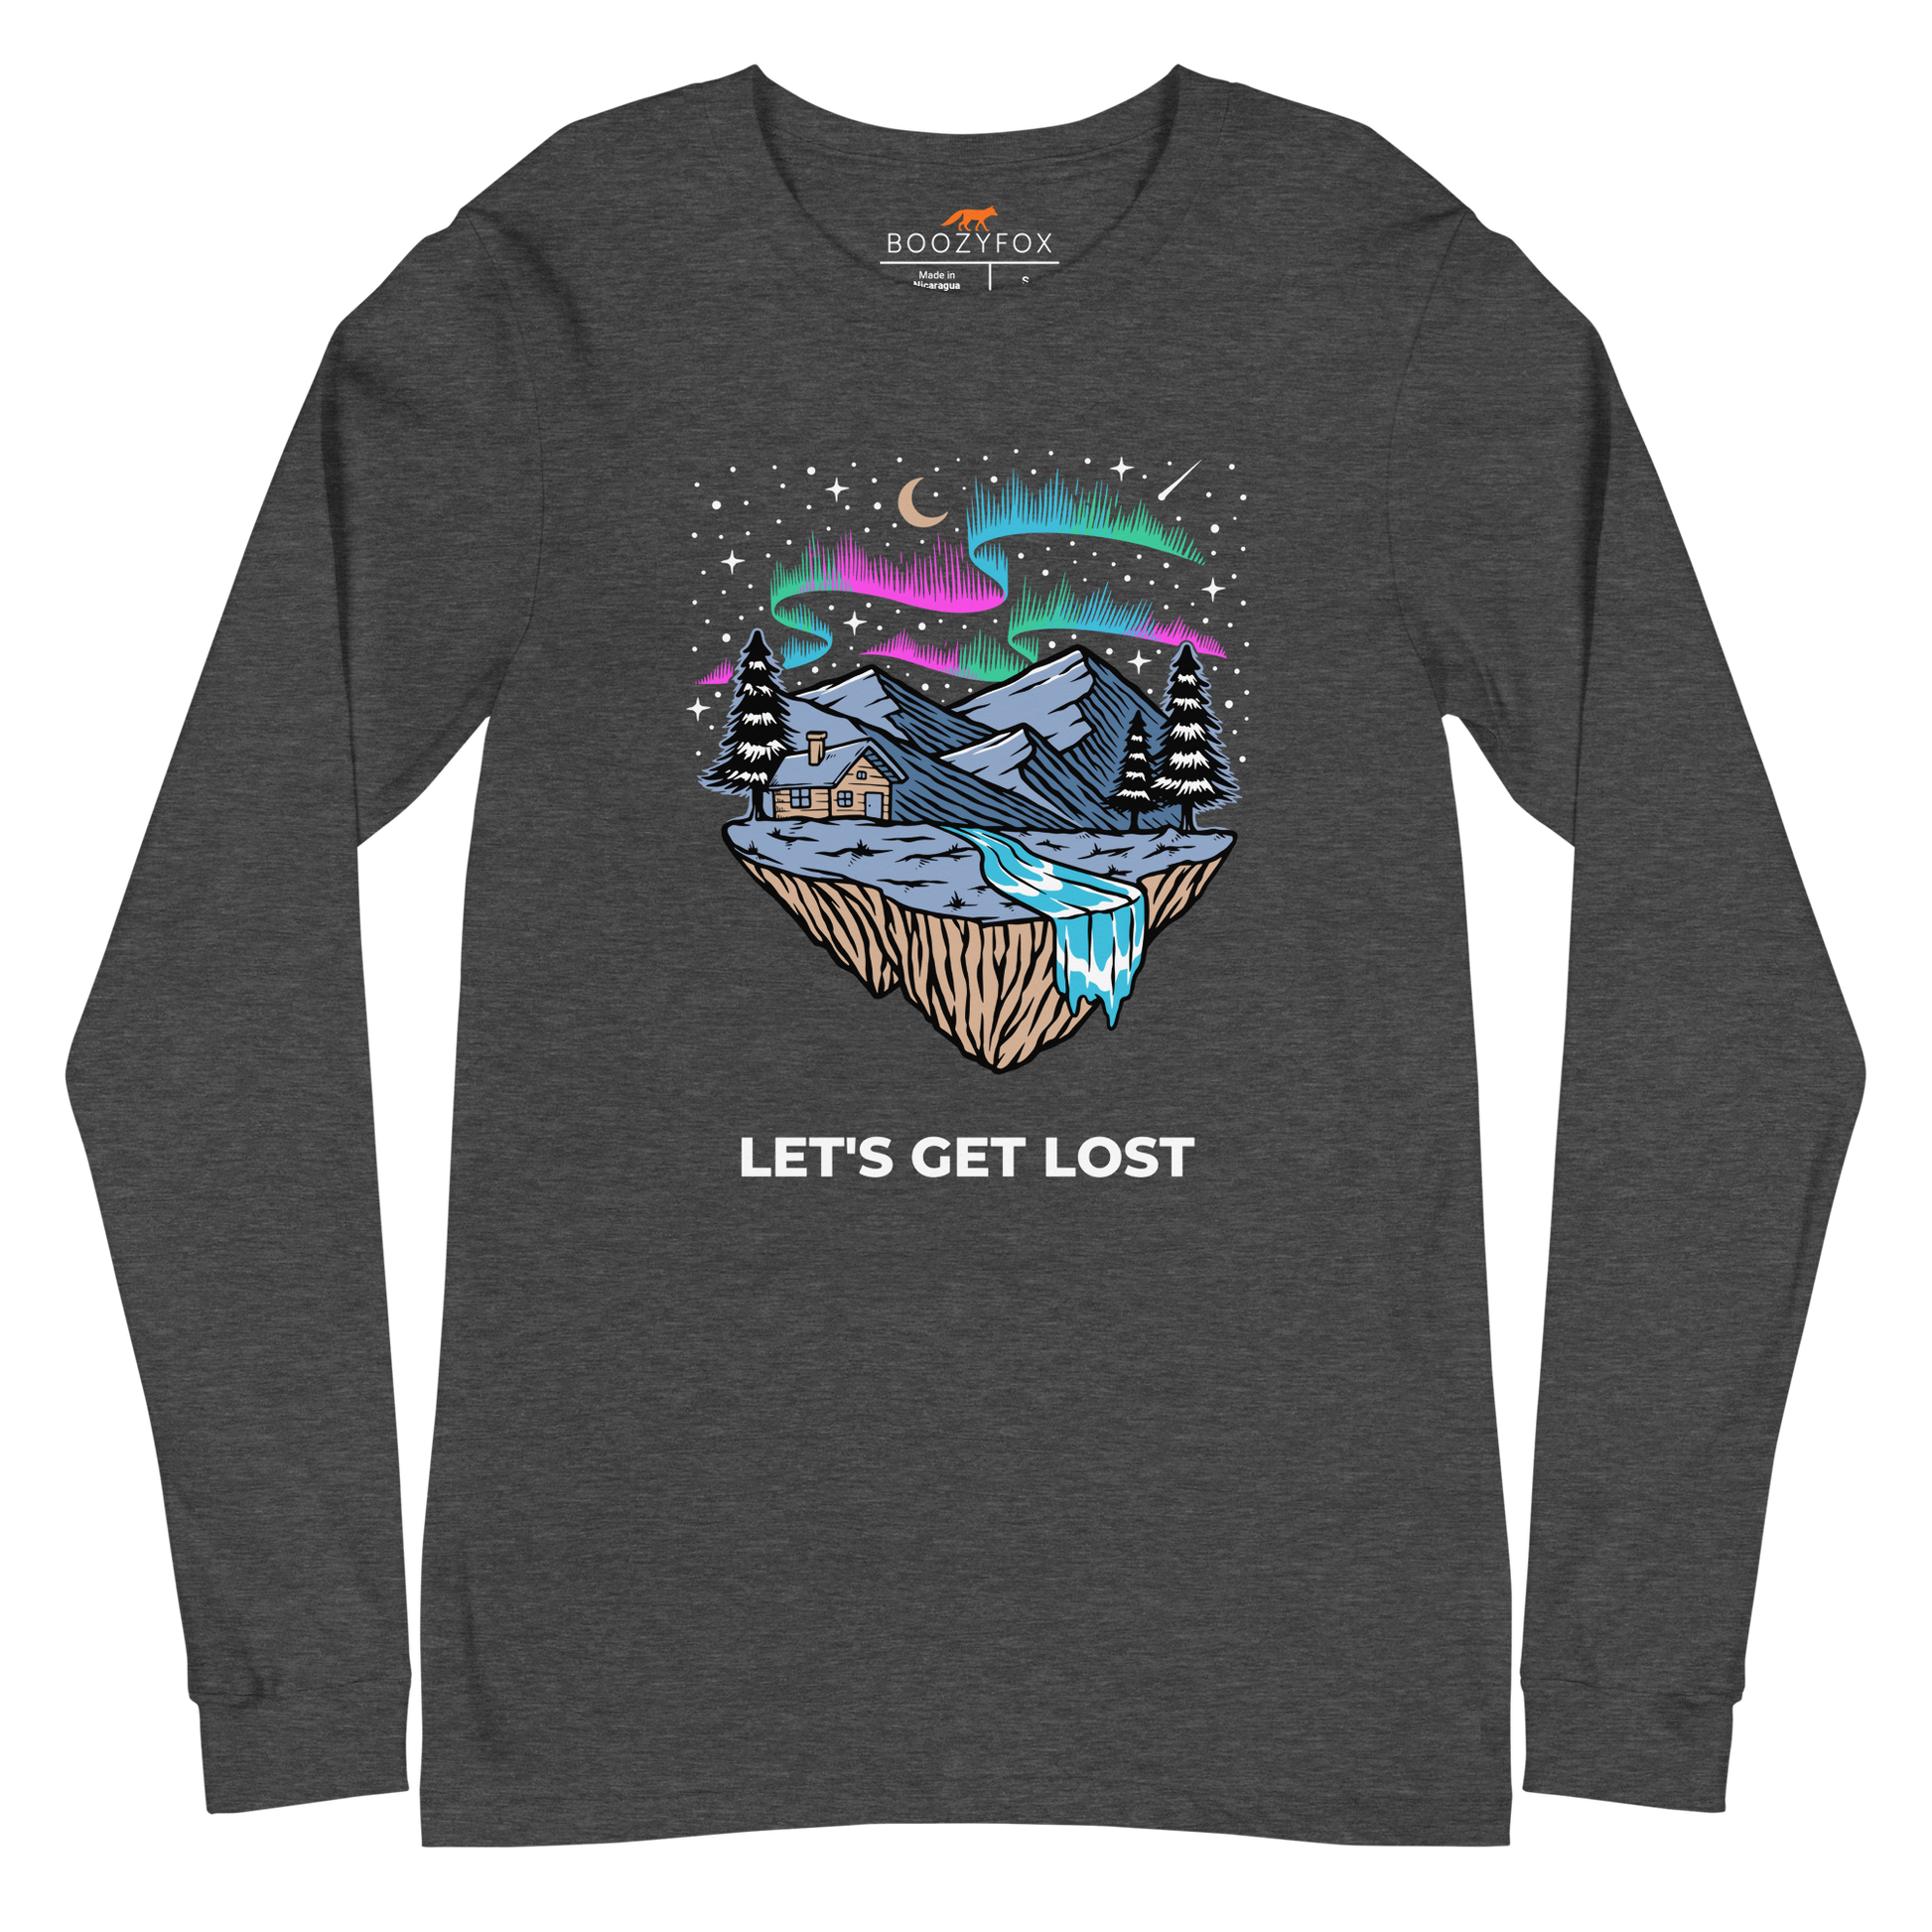 Dark Grey Heather Let's Get Lost Long Sleeve Tee featuring a mesmerizing night sky, adorned with stars and aurora borealis graphic on the chest - Cool Northern Lights Long Sleeve Graphic Tees - Boozy Fox